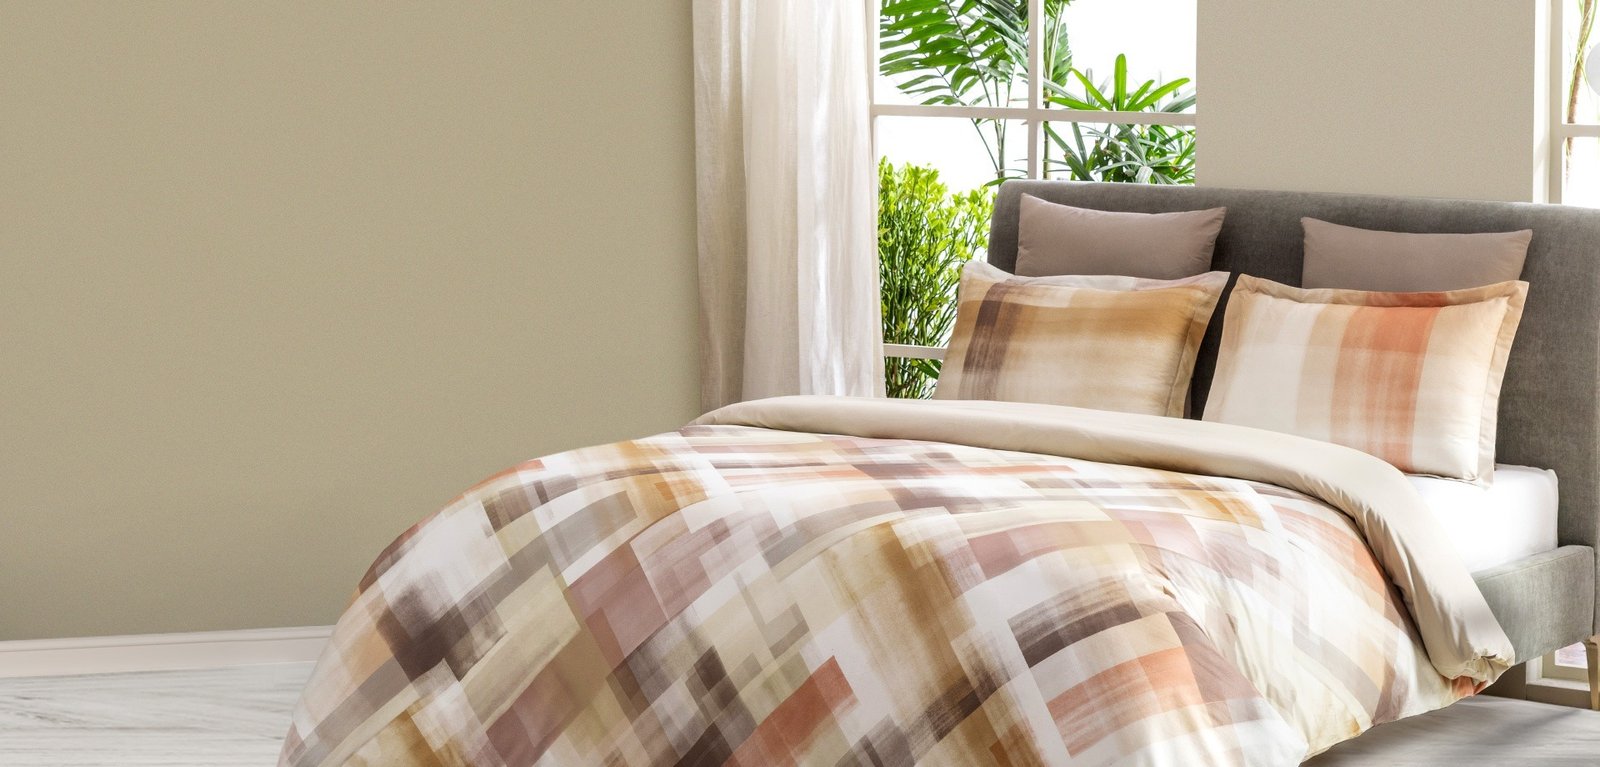 A cozy bed with a white and brown comforter, inviting you to relax and unwind.